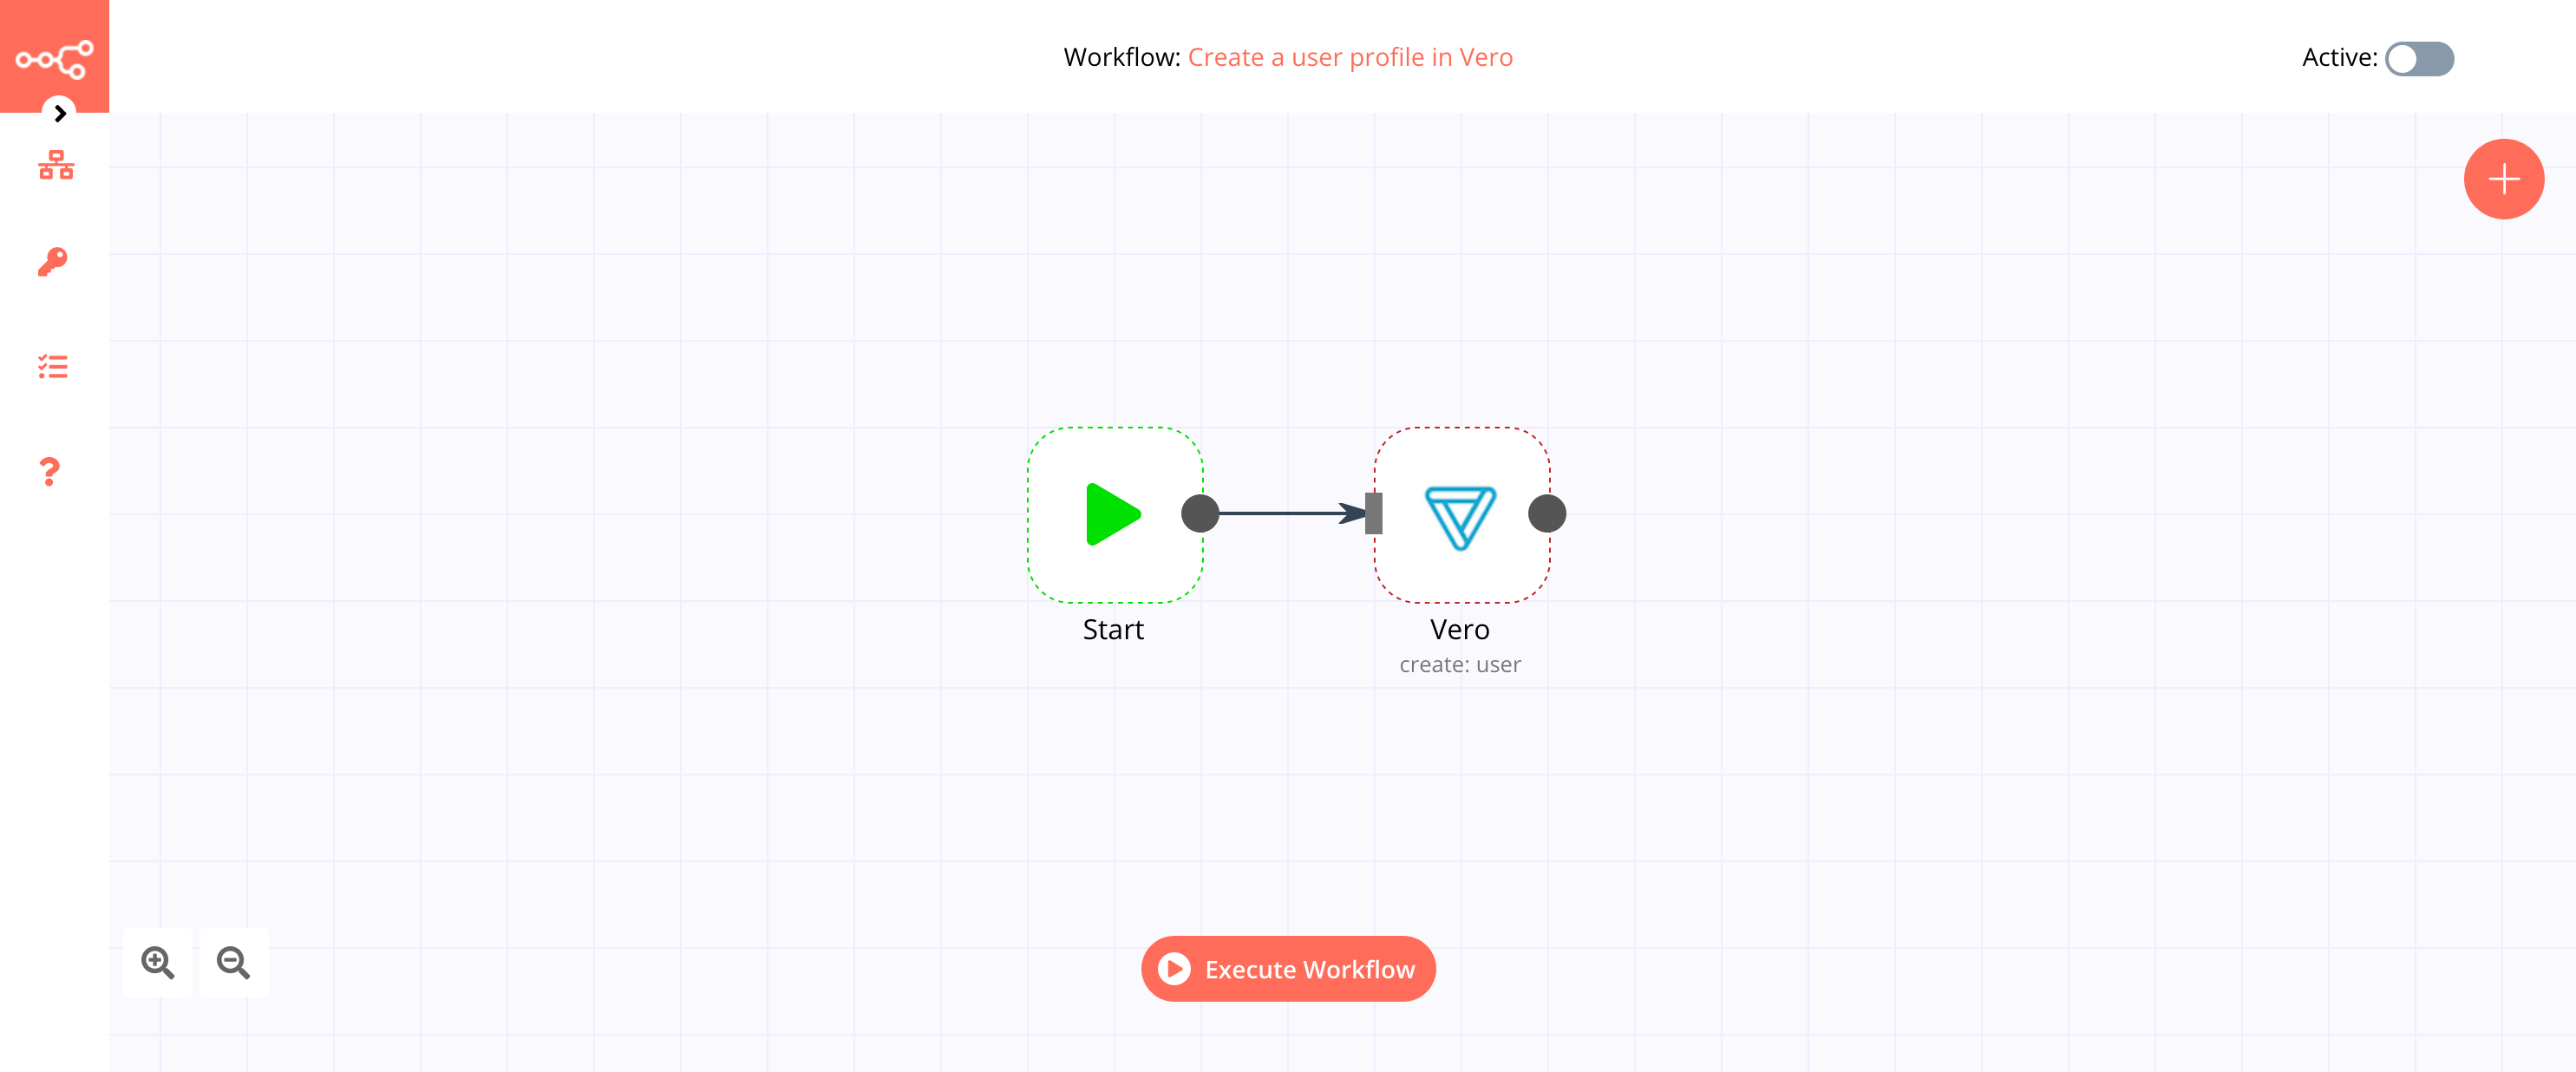 A workflow with the Vero node